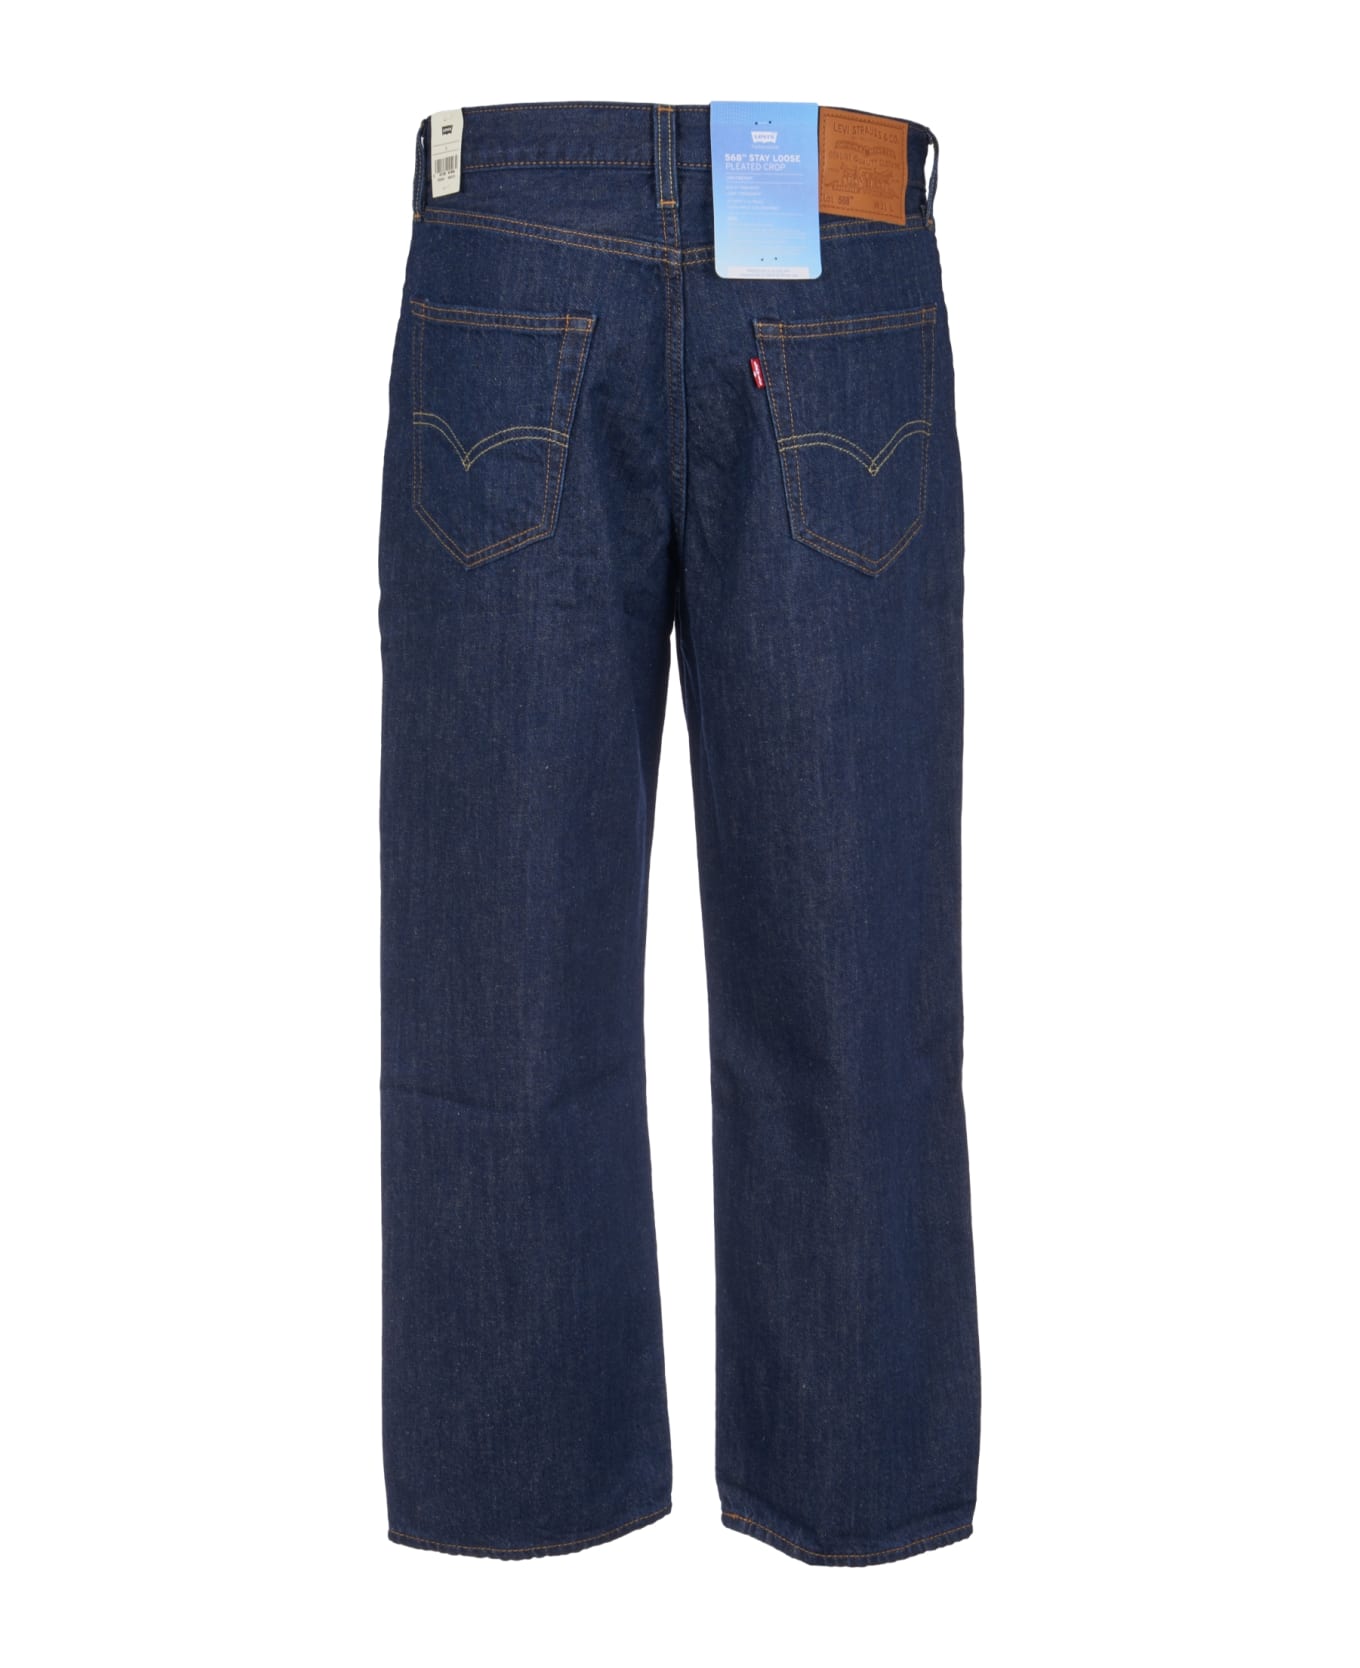 Levi's Buttoned Cropped Jeans - Blue デニム